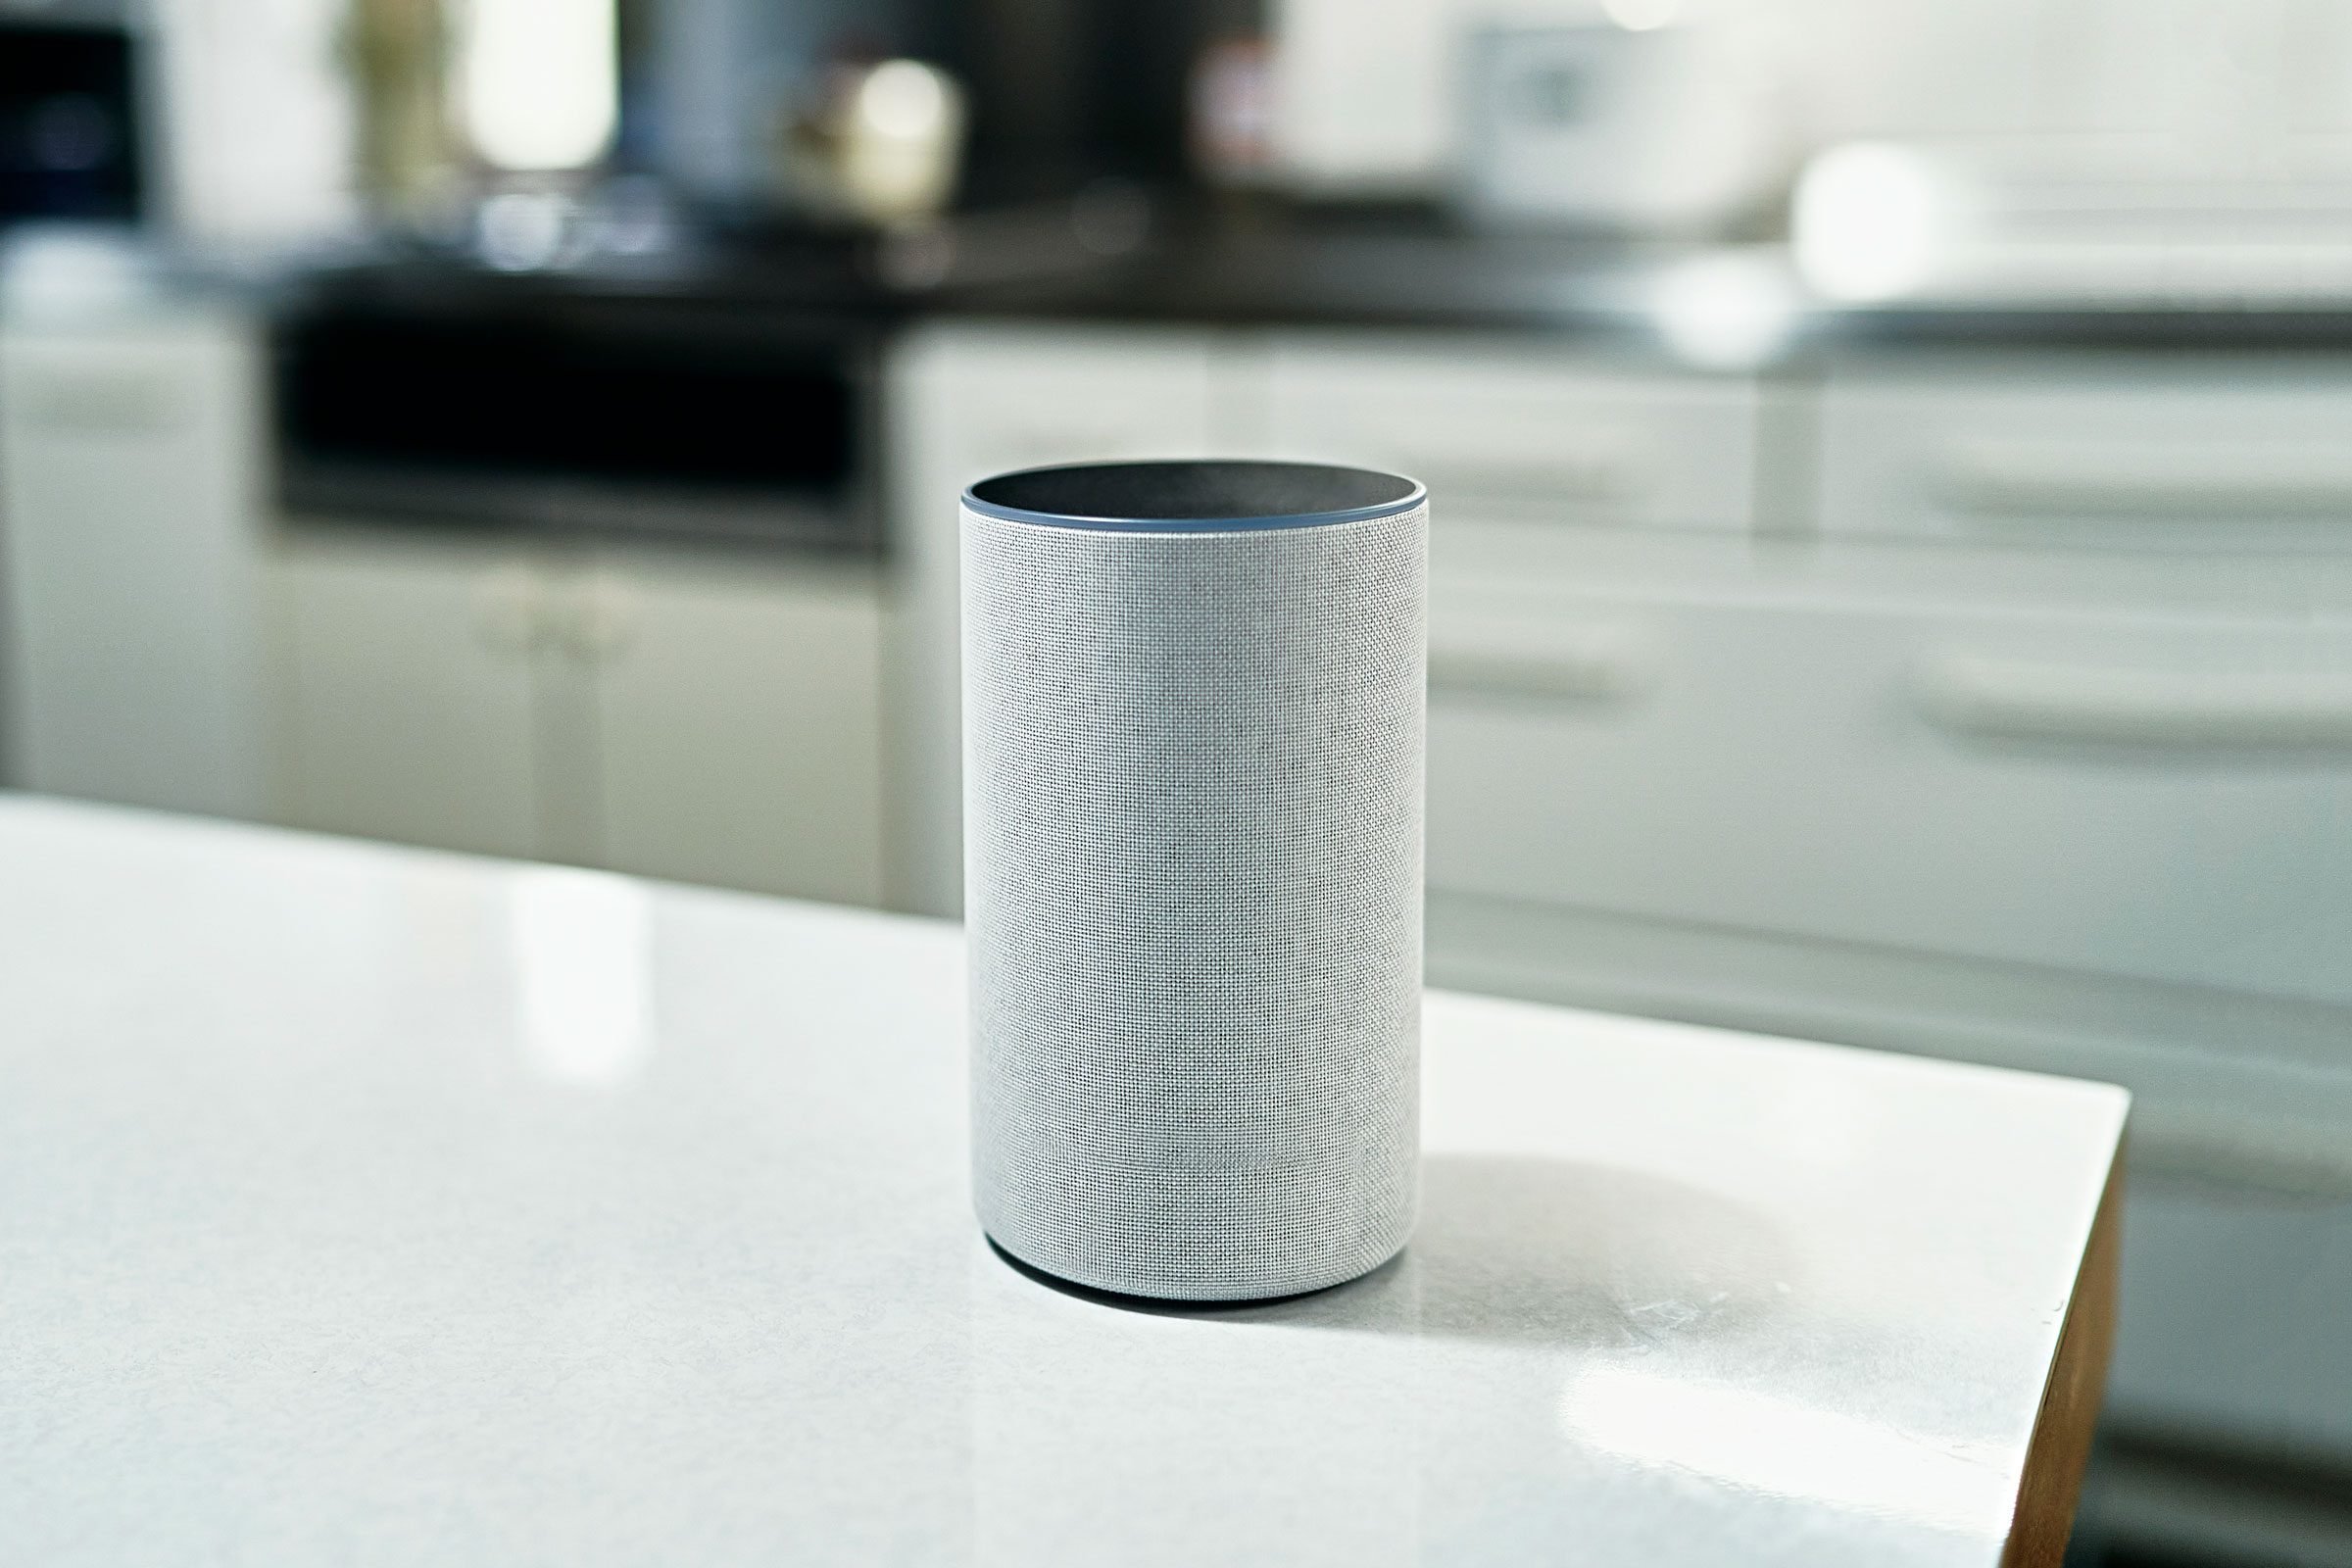 Can Alexa Be Hacked? Here's How To Prevent It